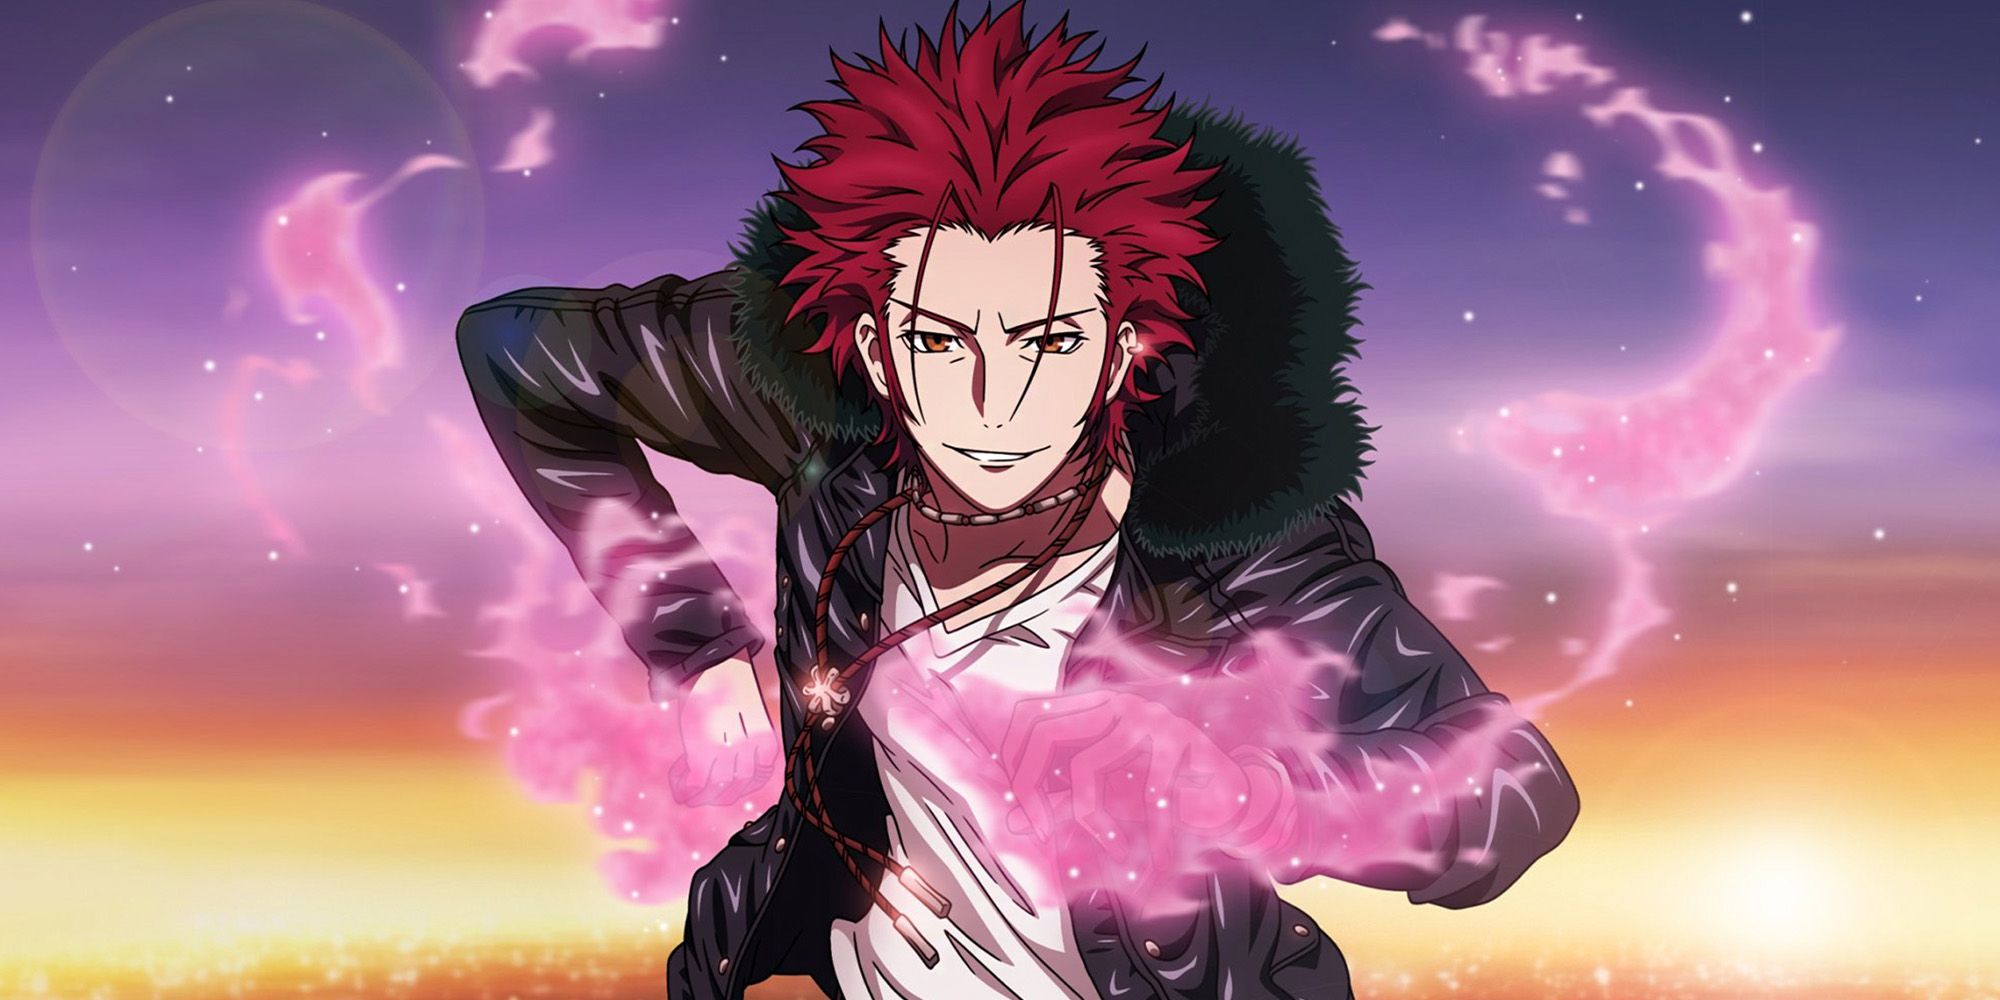 Mikoto Suoh from K Project using his fire powers